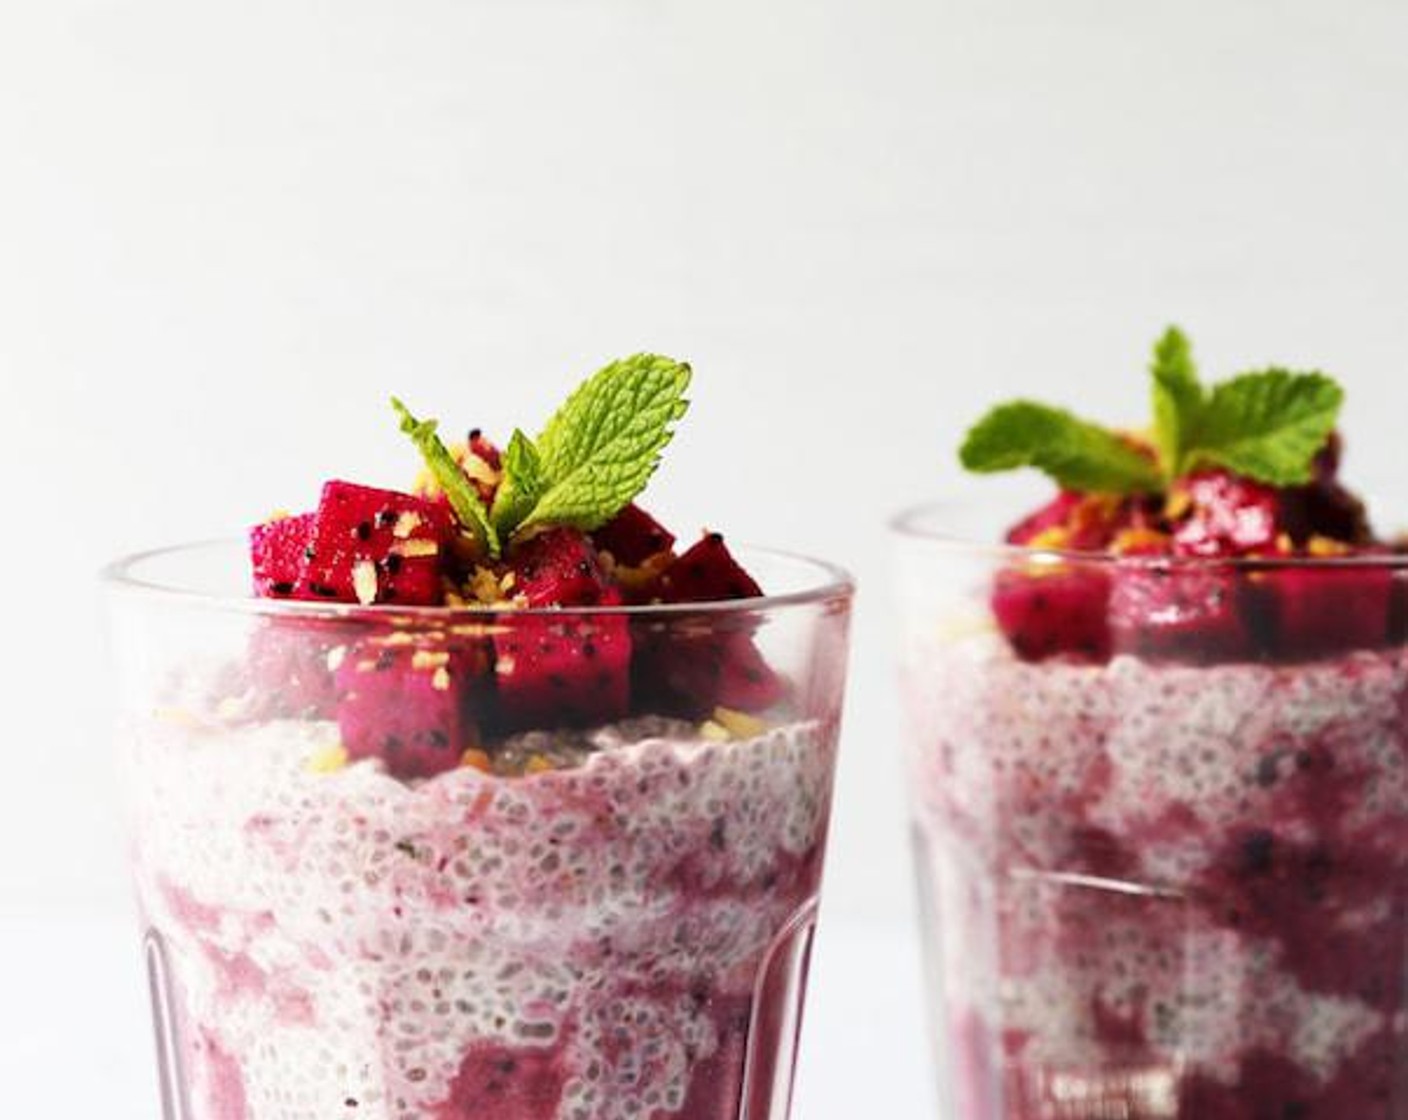 step 5 Decorate with extra chopped dragon fruit, coconut chips, a drizzle of honey and mint.
Serve immediately. Enjoy!